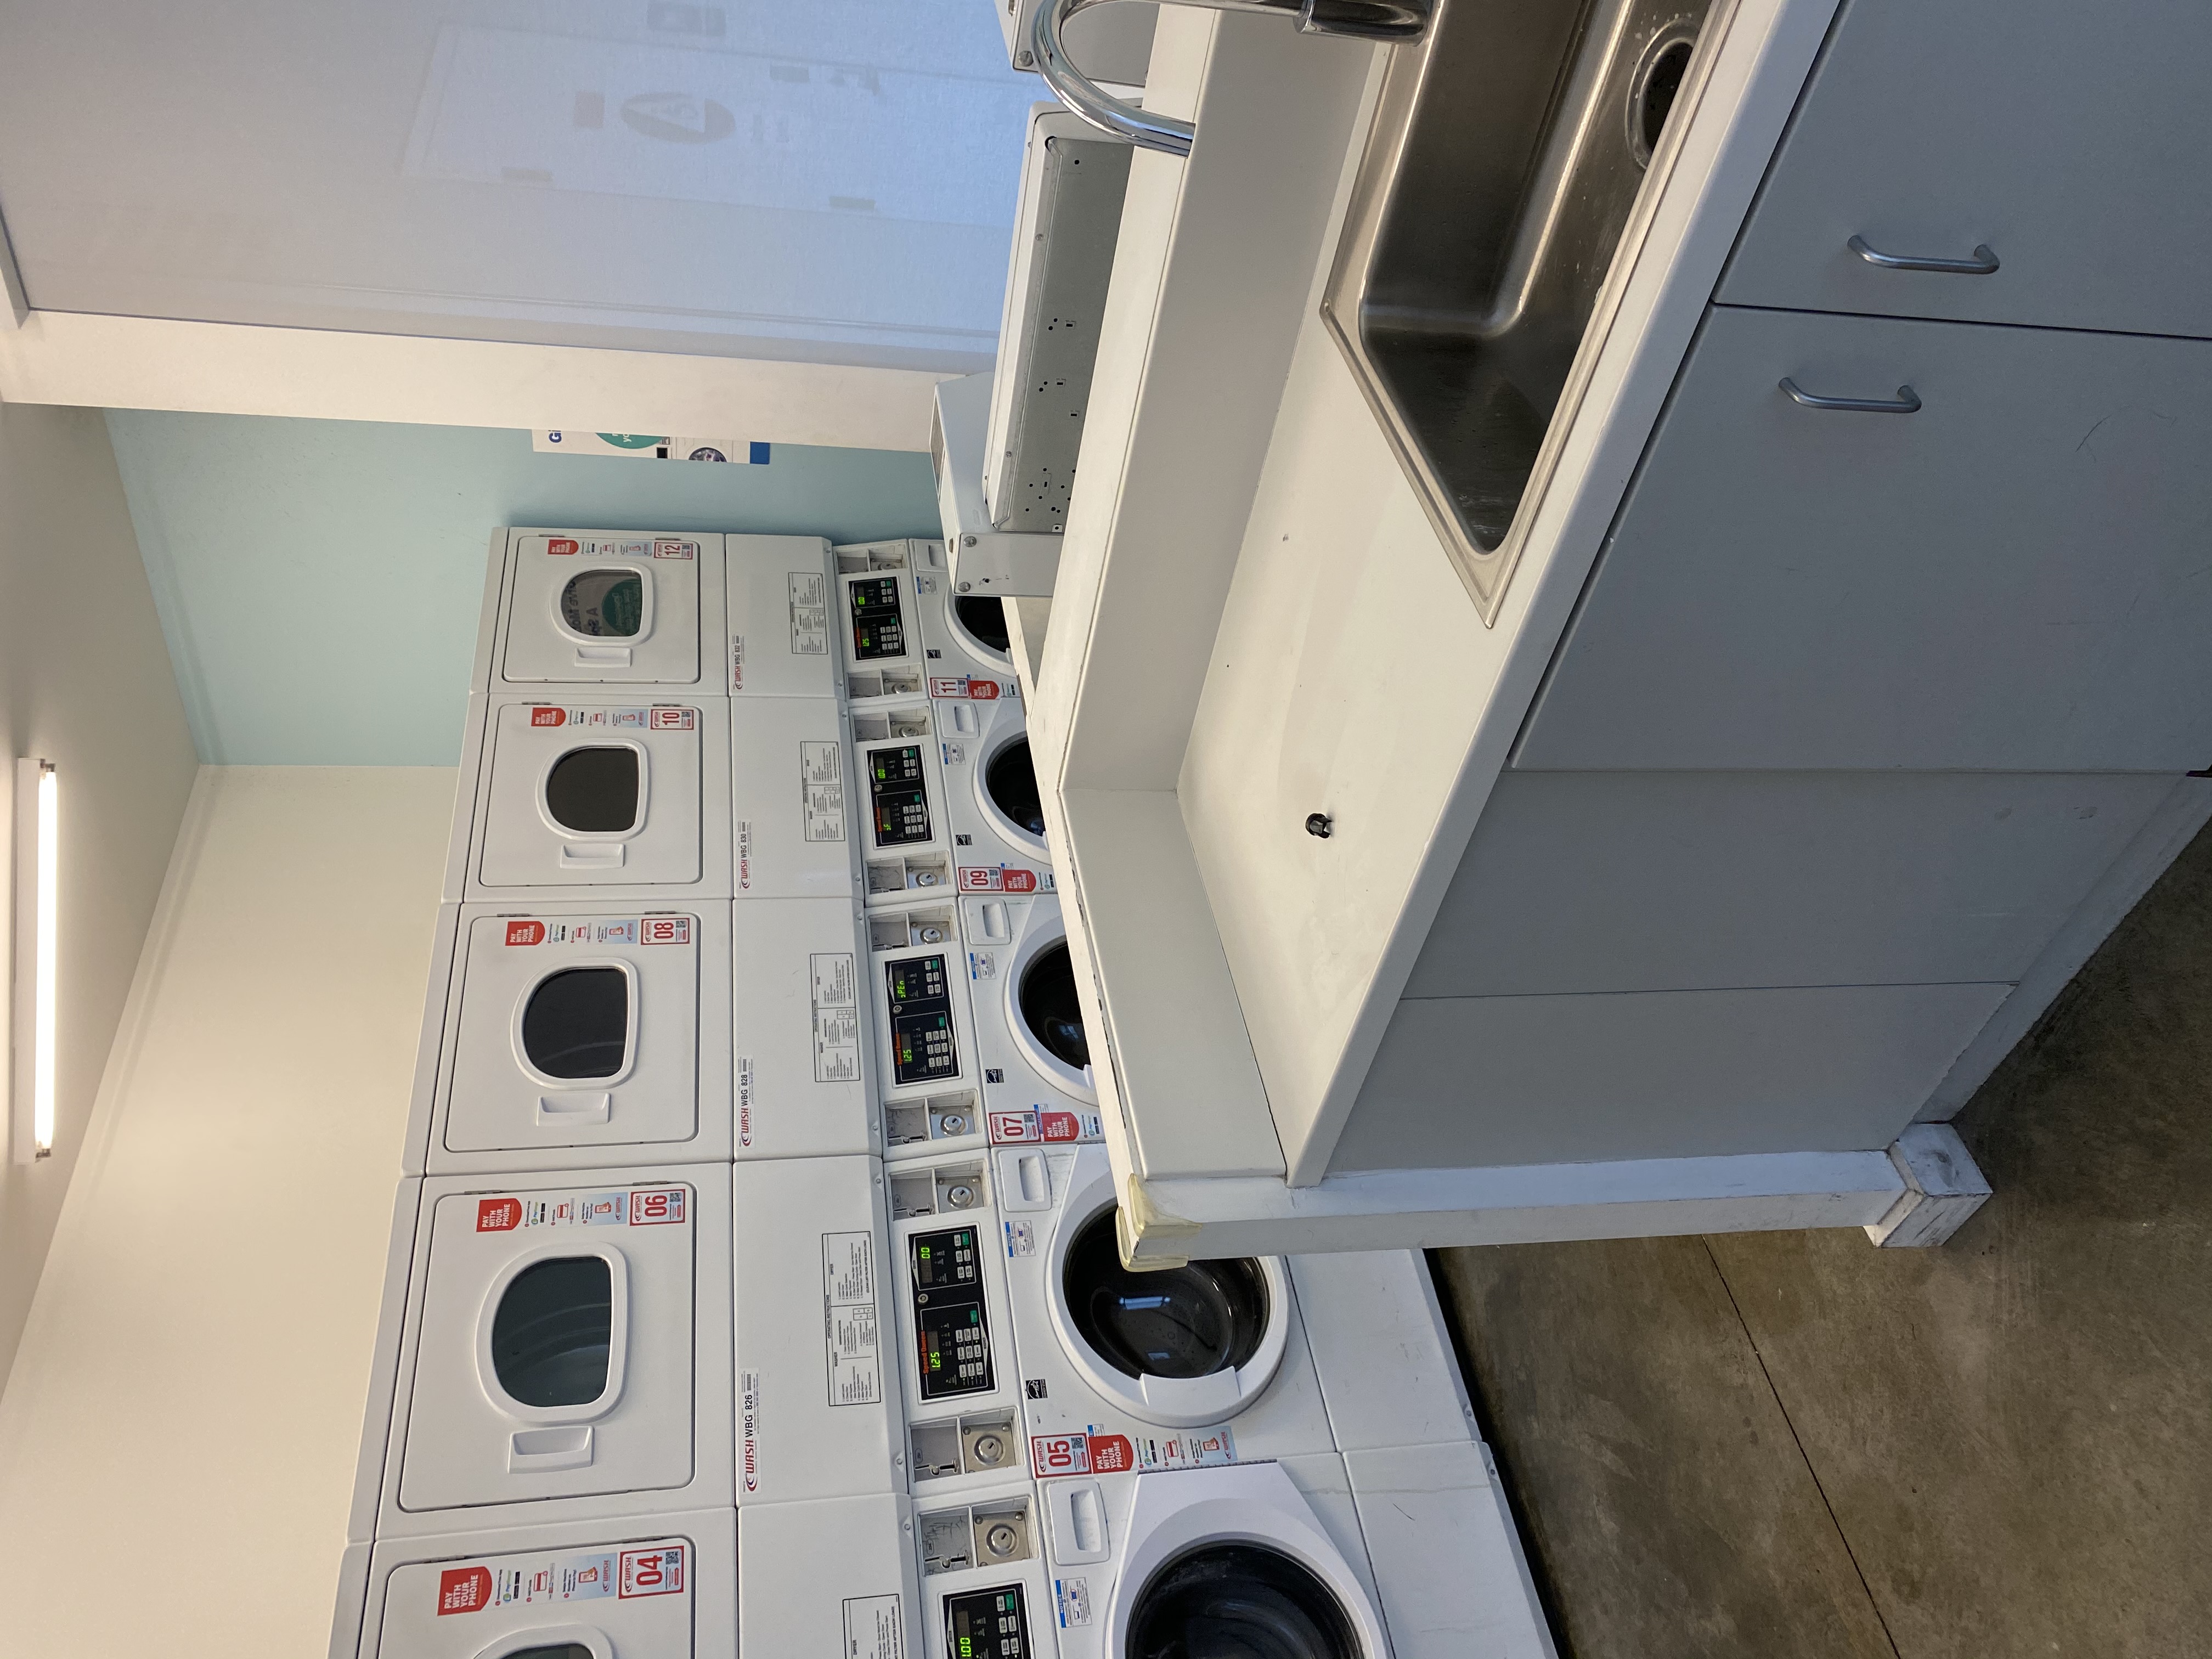 Interior view showing 5 washers and 5 dryers.